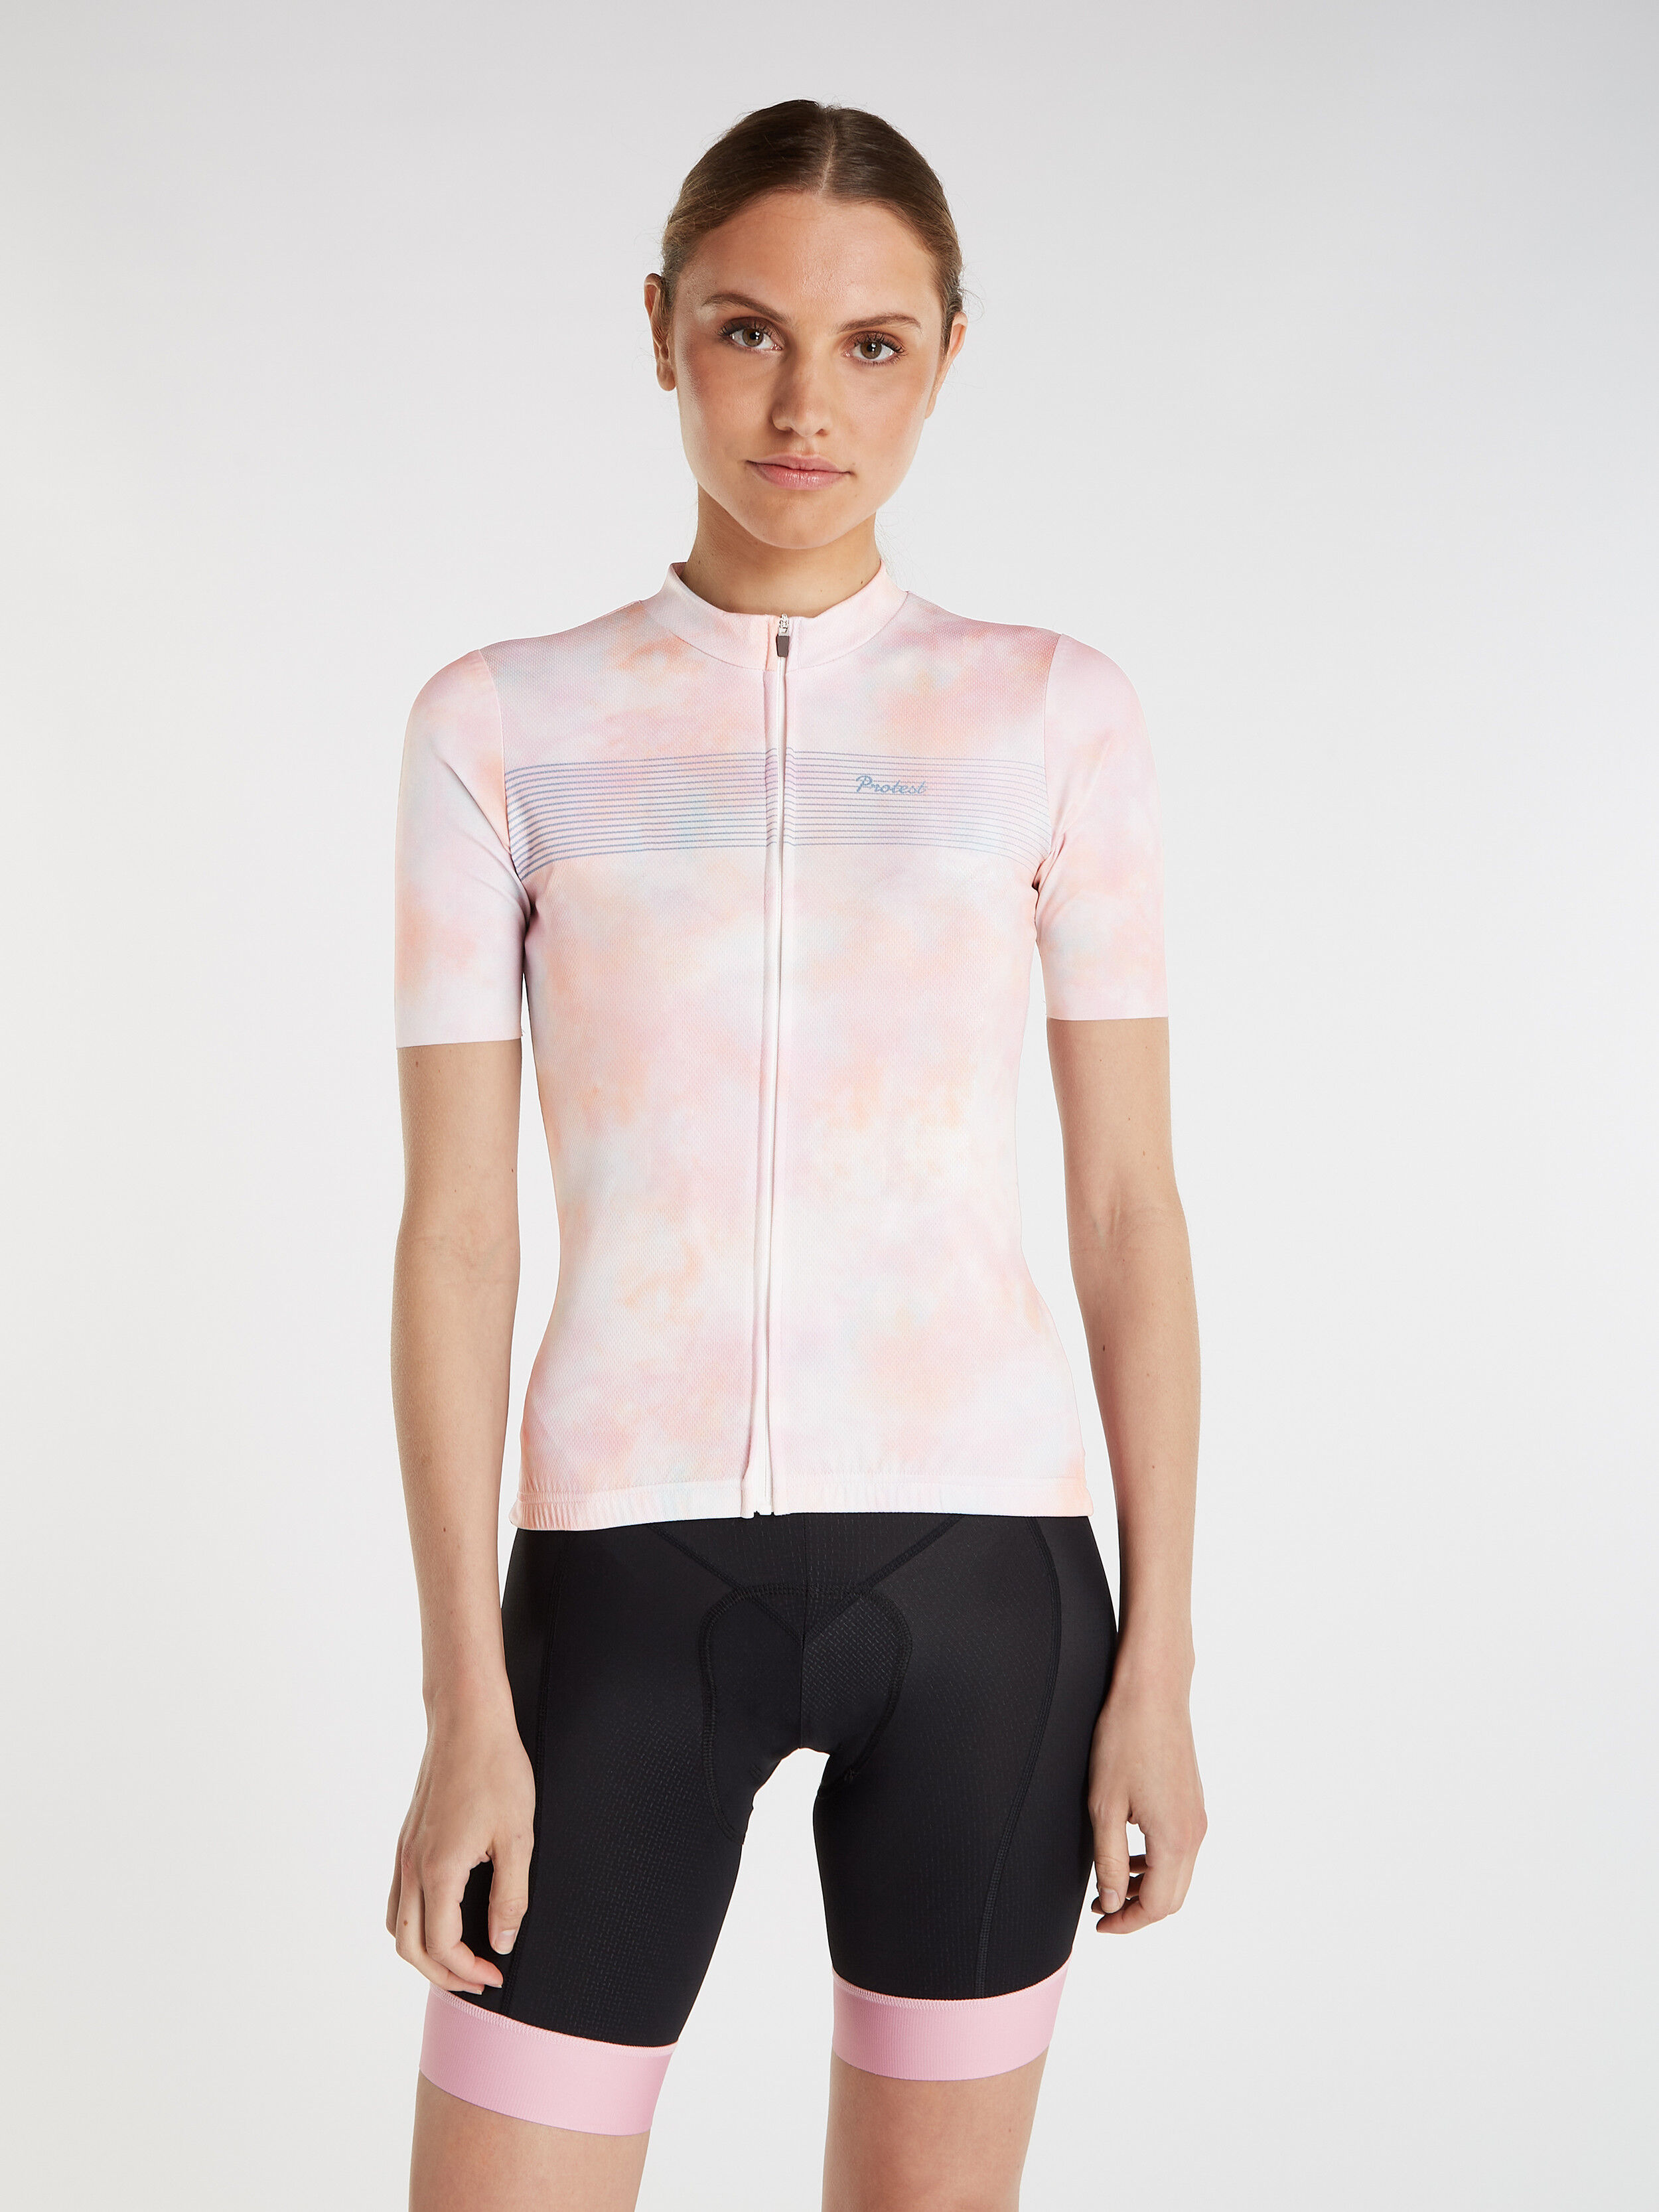 Protest Prtoat - Maillot ciclismo - Mujer | Hardloop